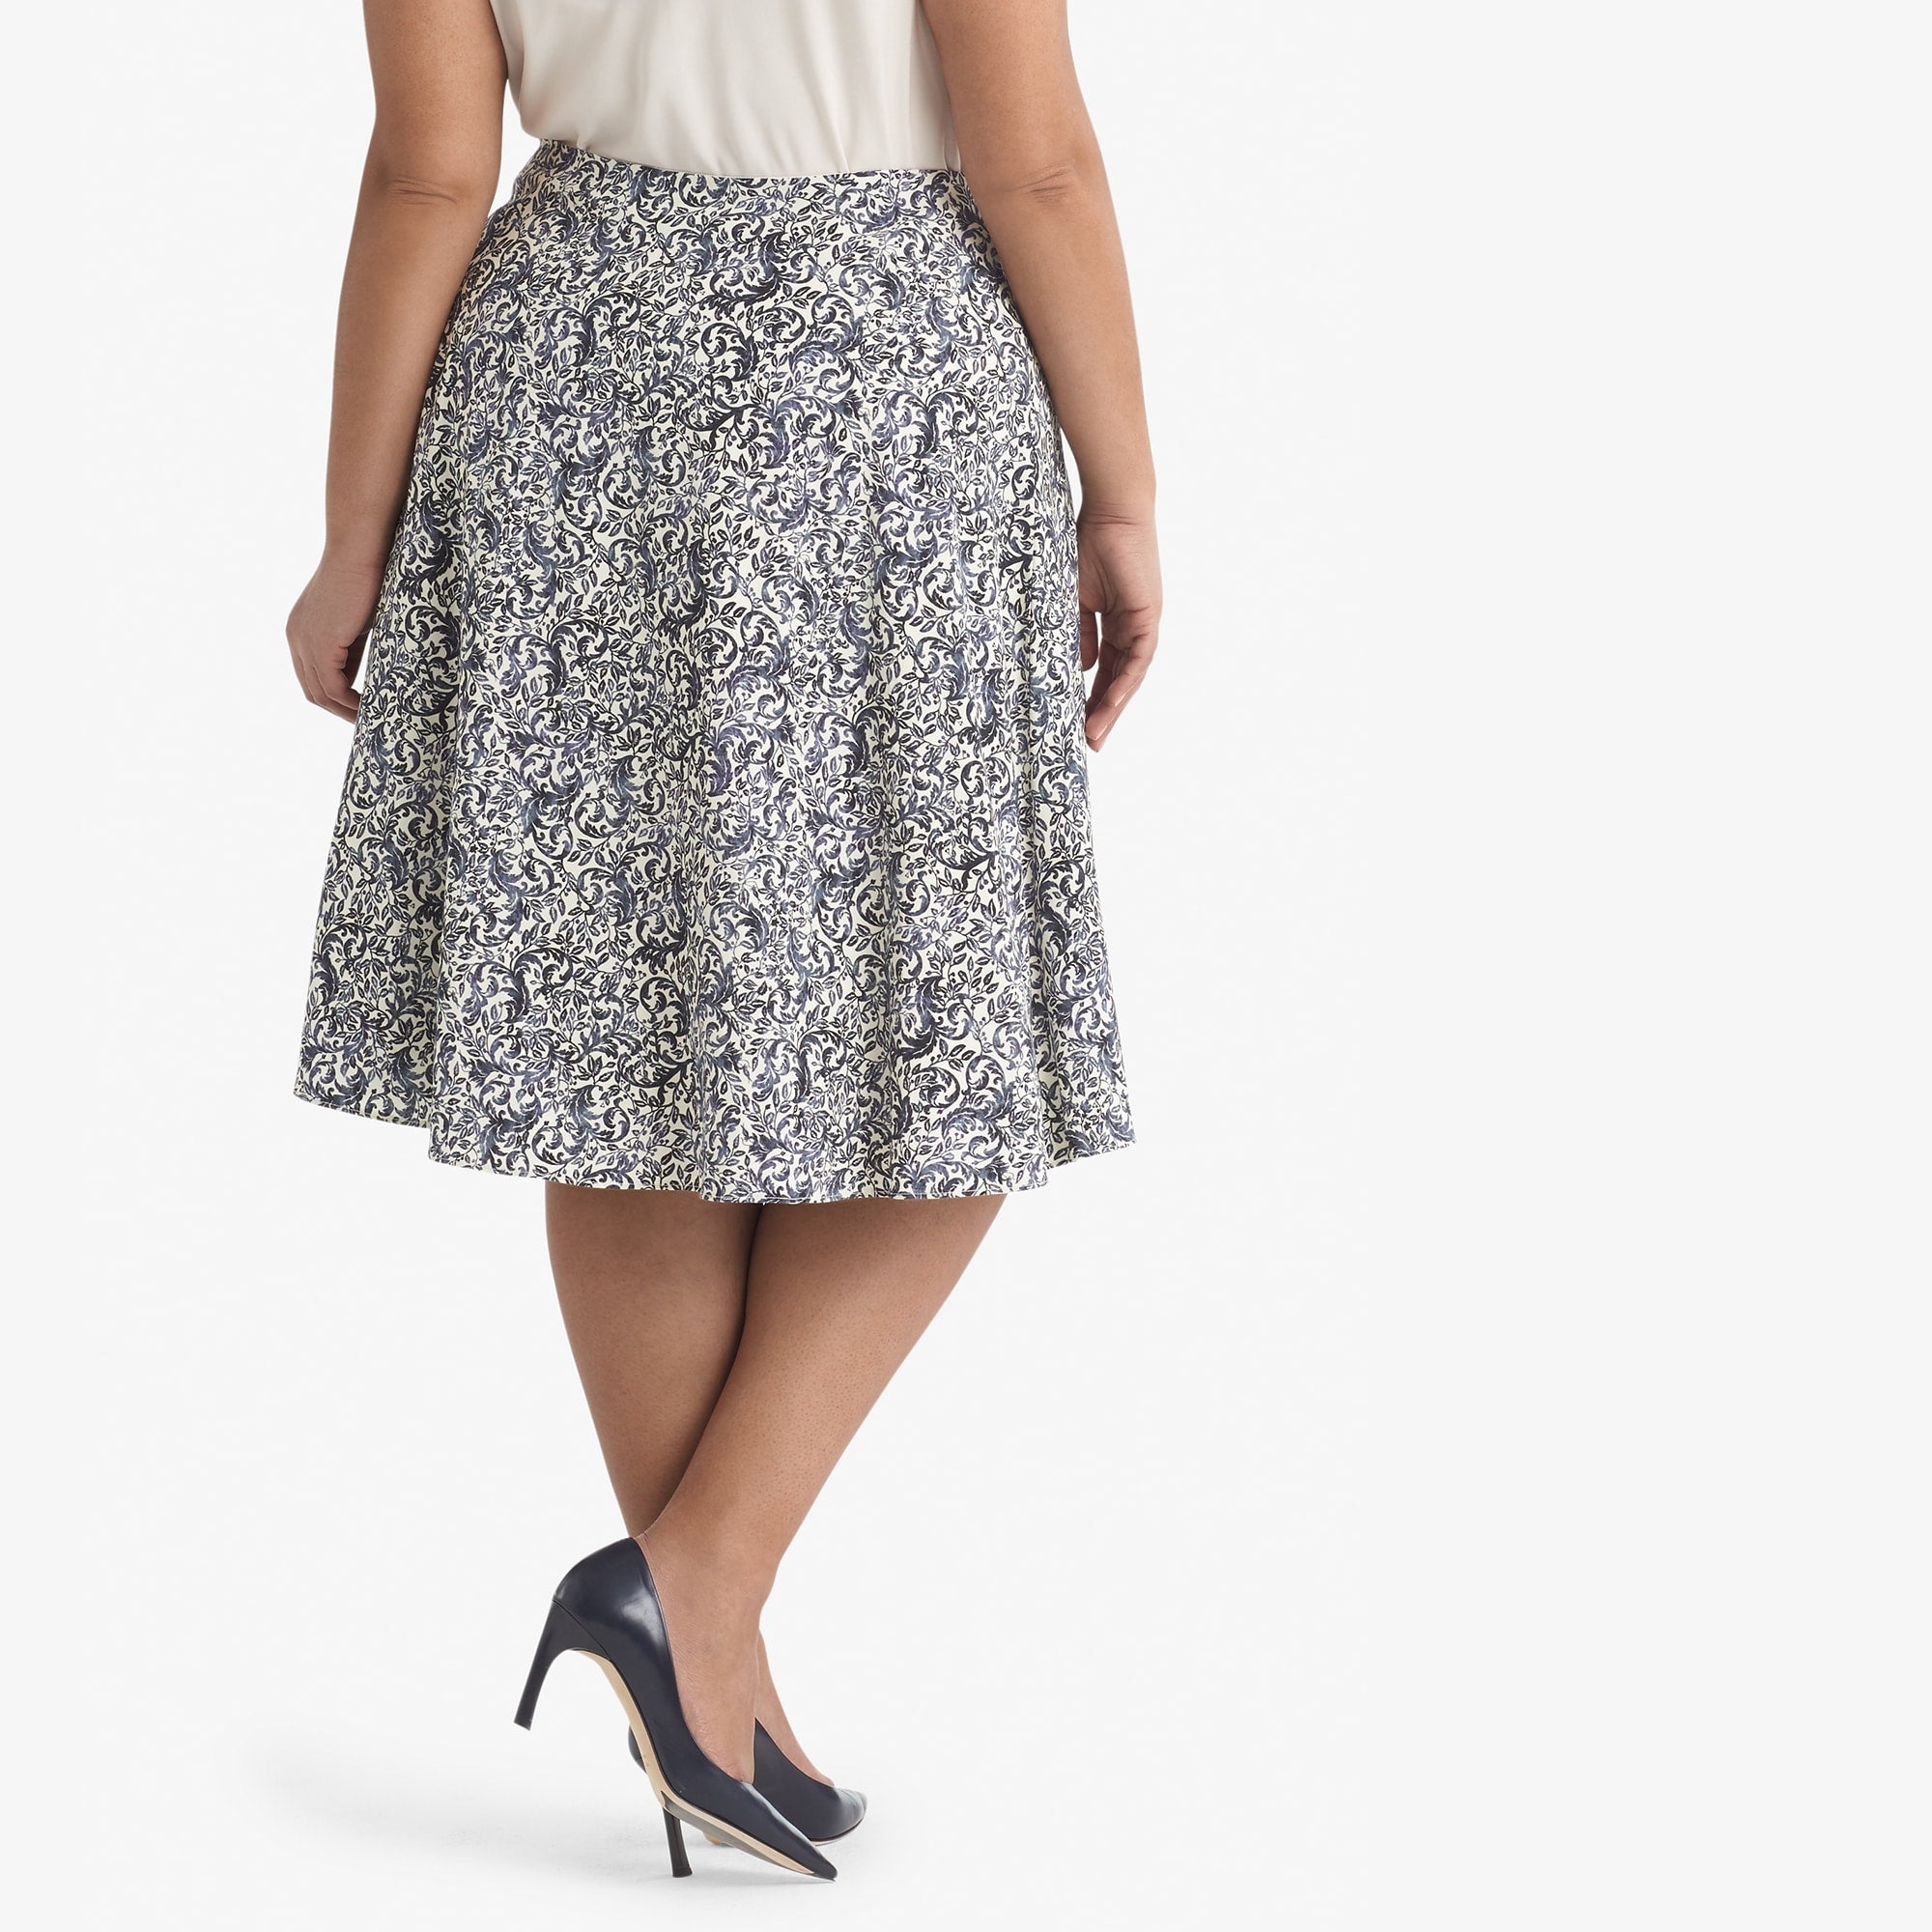 Back image of a woman standing wearing the Hopson skirt Ivy Print in galaxy blue